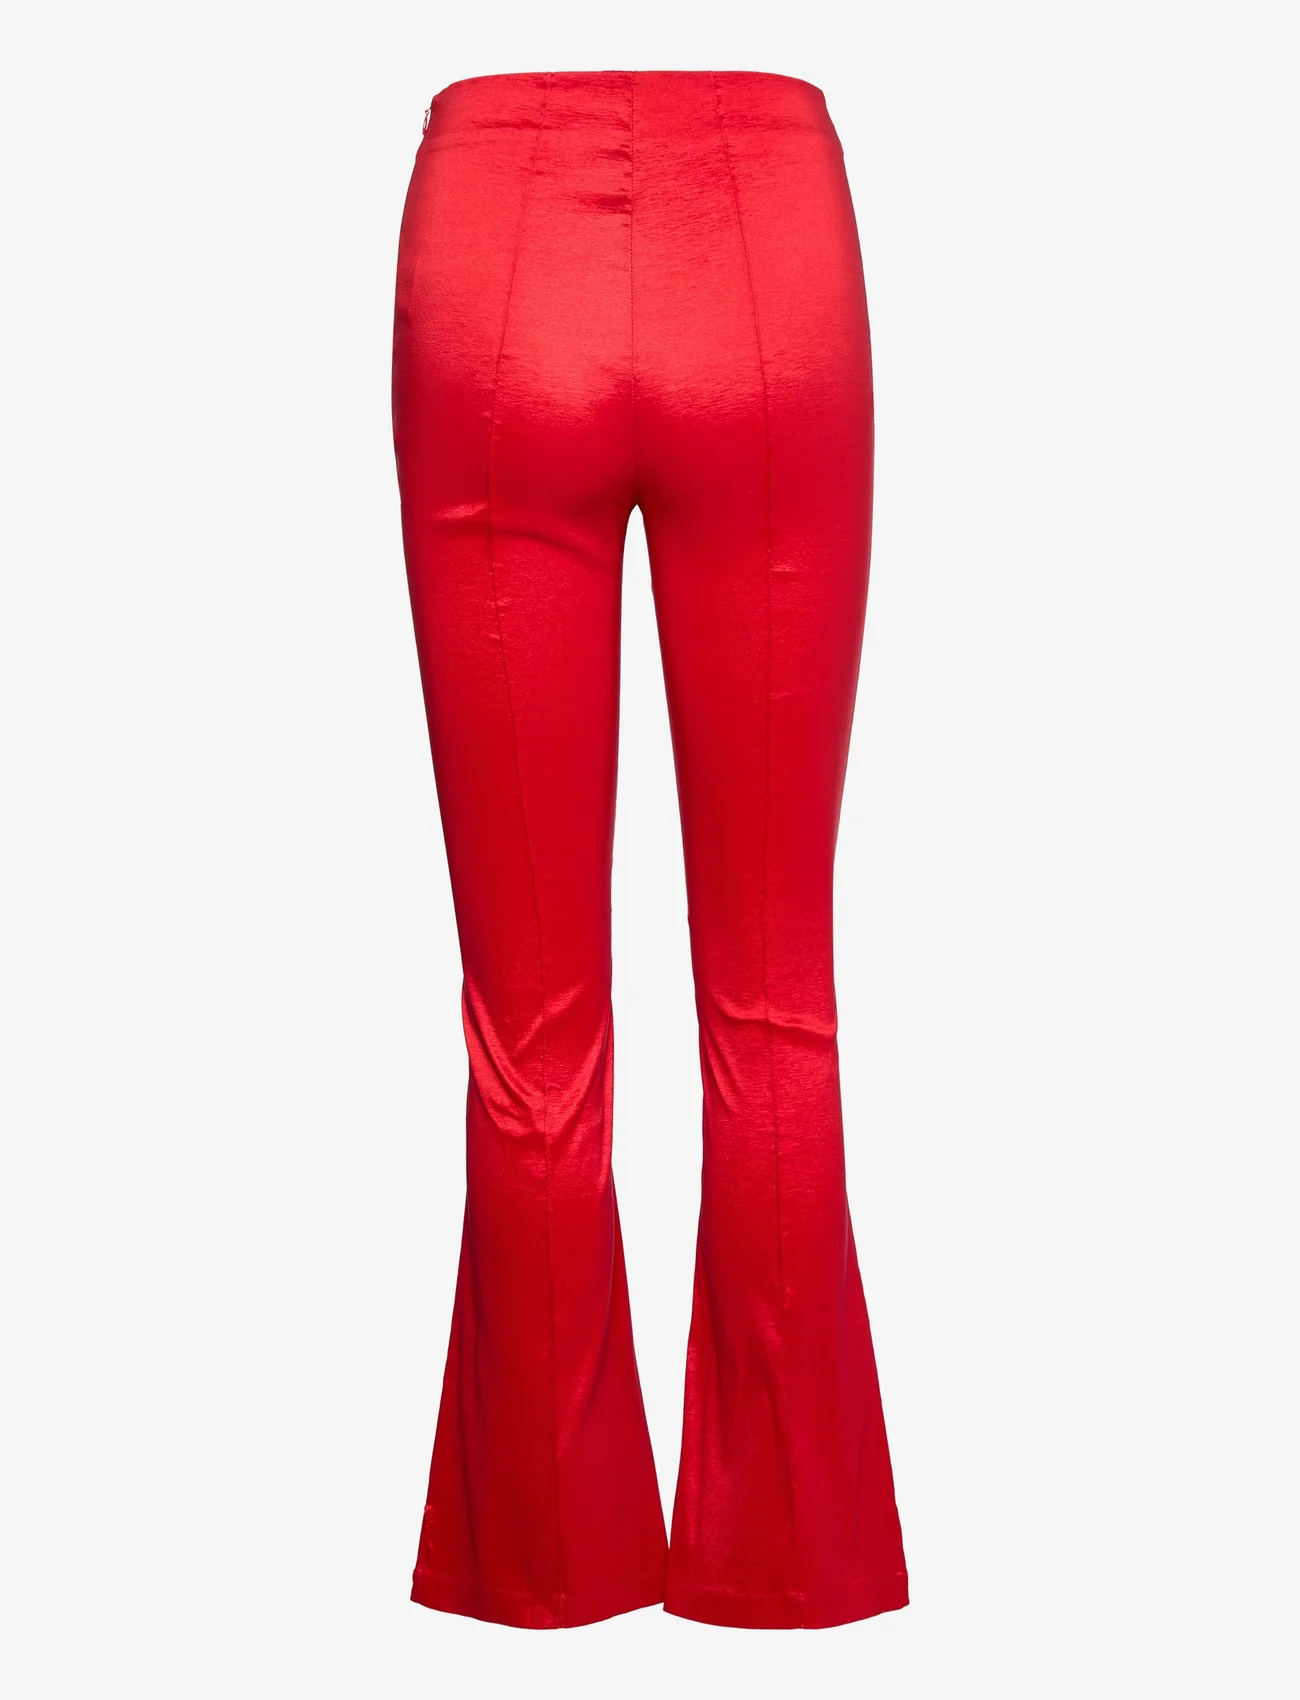 Hosbjerg - Glory Pants - trousers - red - 1